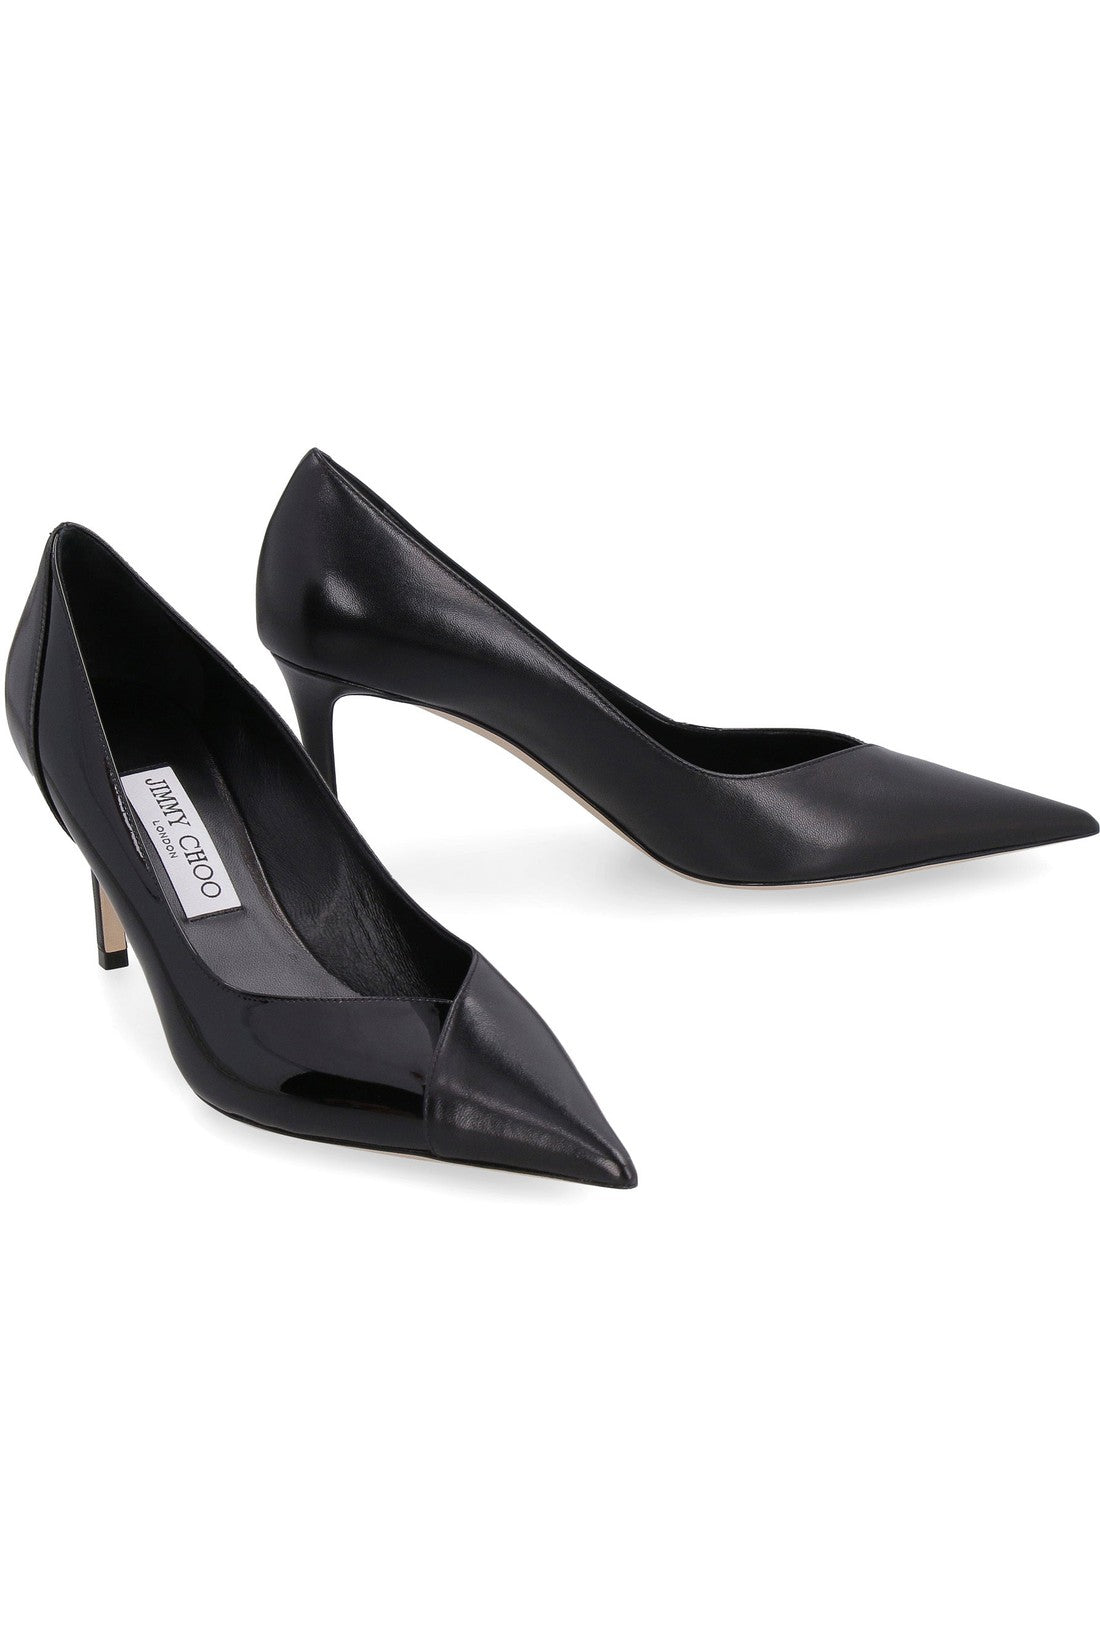 Jimmy Choo-OUTLET-SALE-Cass 75 patent leather pointy-toe pumps-ARCHIVIST